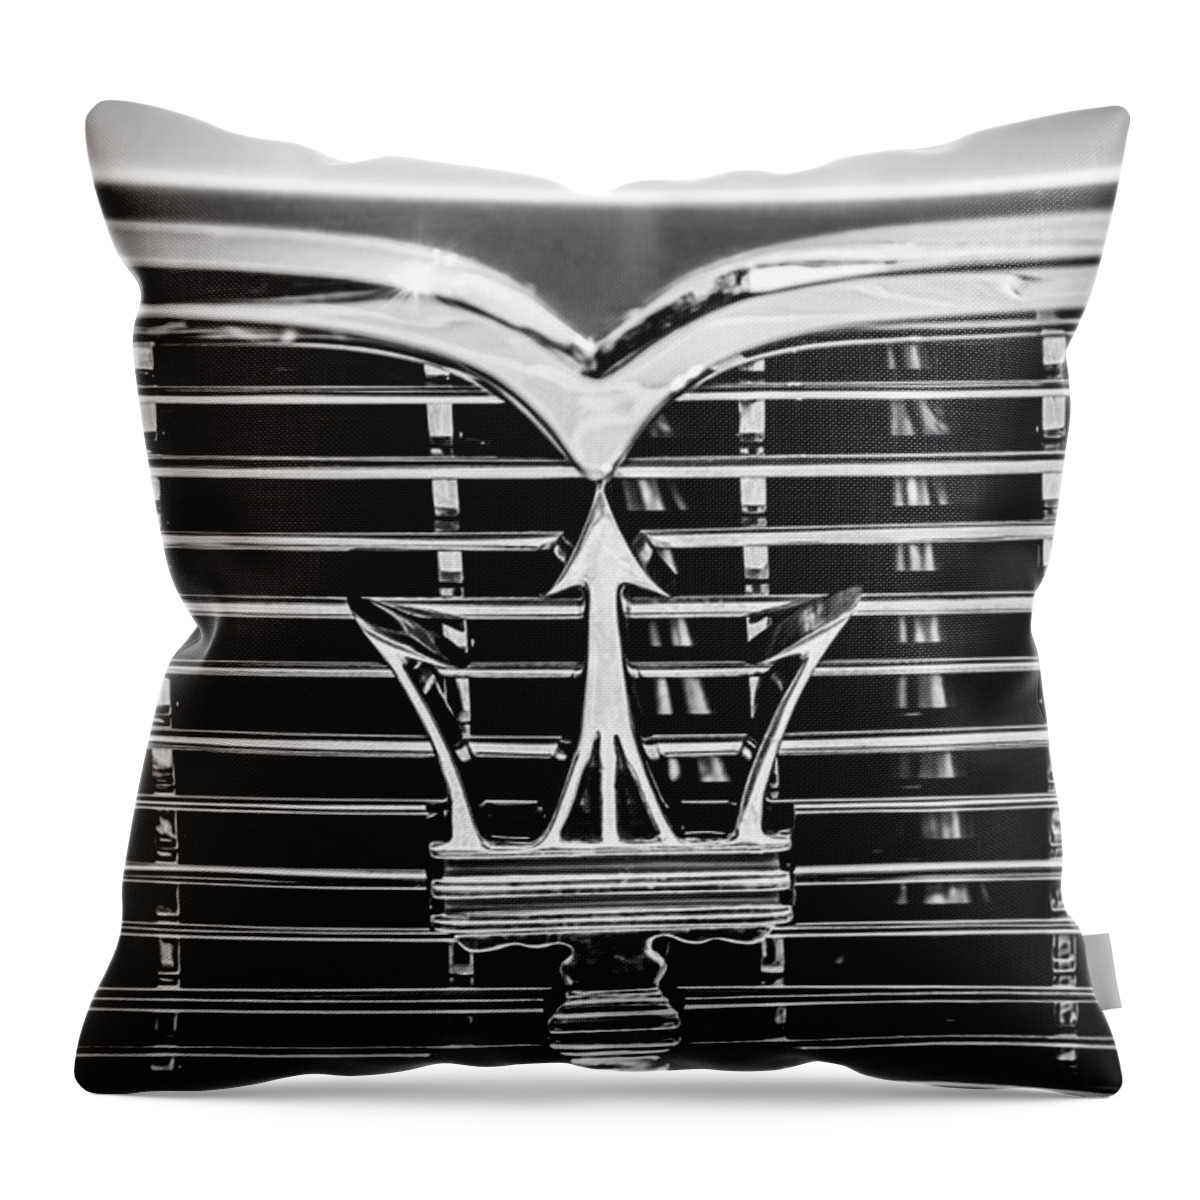 1961 Maserati 3500 Gt Coupe Speciale Grille Emblem Throw Pillow featuring the photograph 1961 Maserati 3500 GT Coupe Speciale Grille Emblem -0995bw by Jill Reger